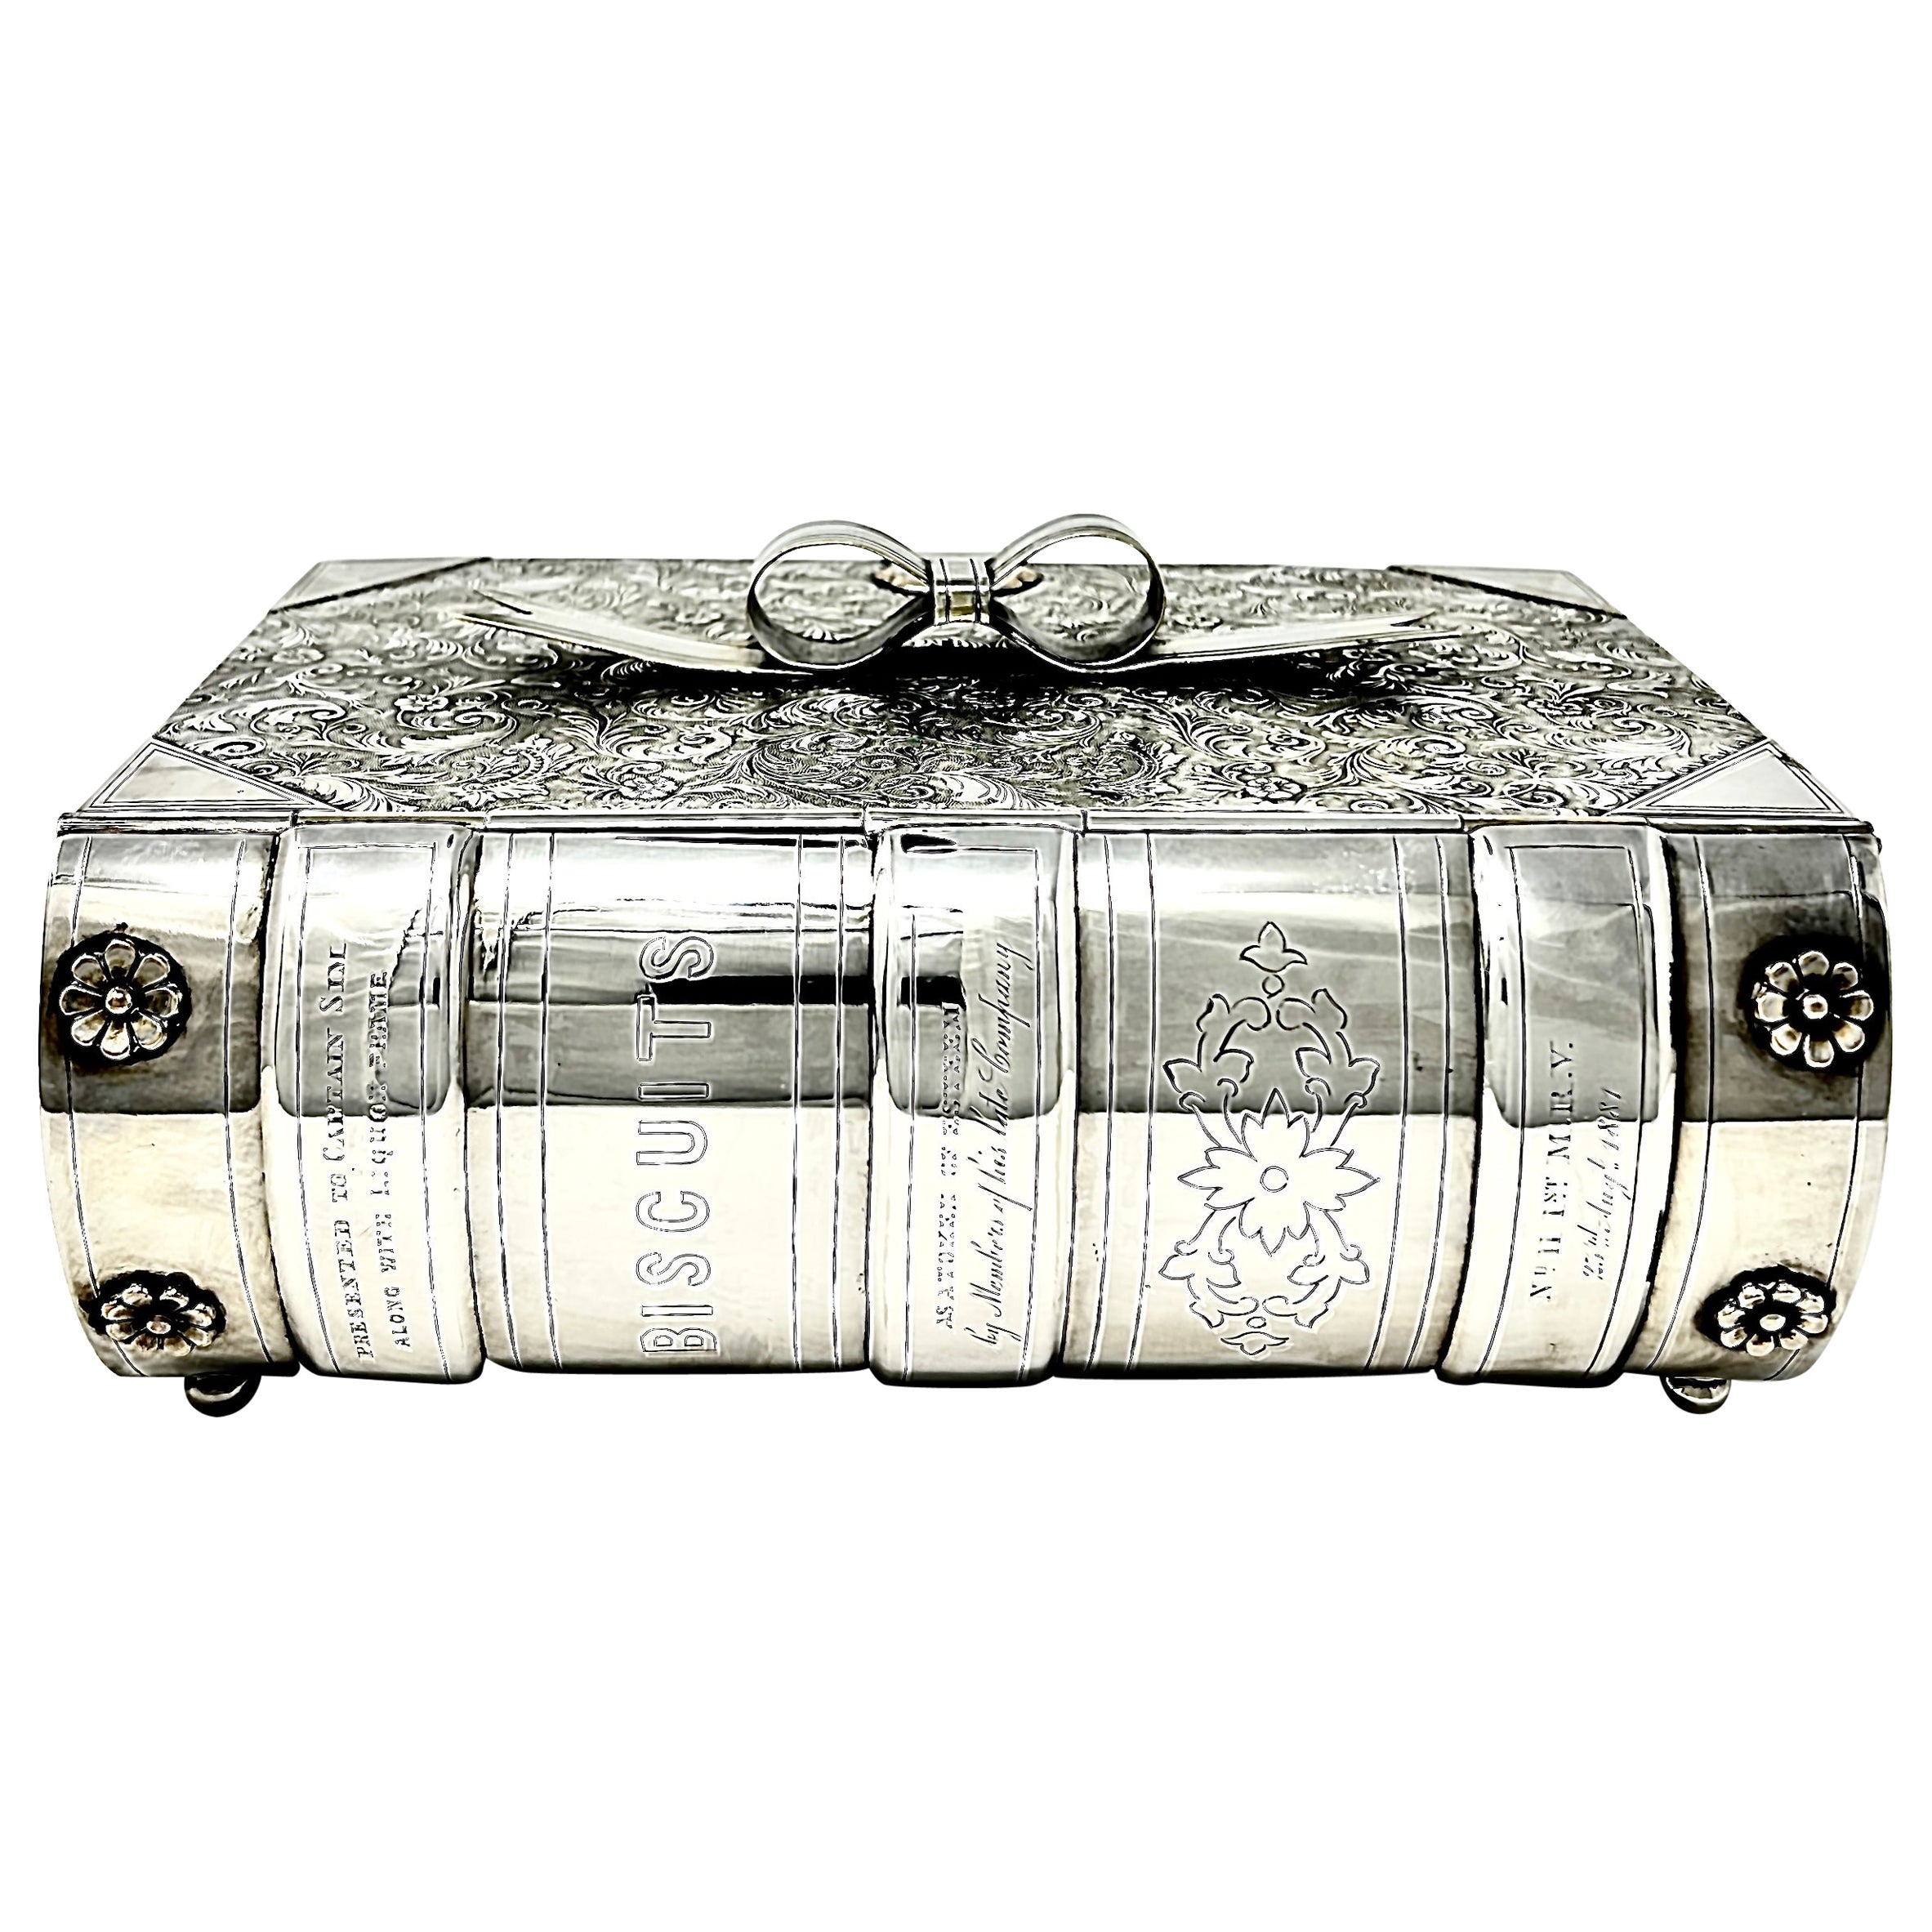 Antique English Book-Shaped Sheffield Silver Plated Biscuit Box